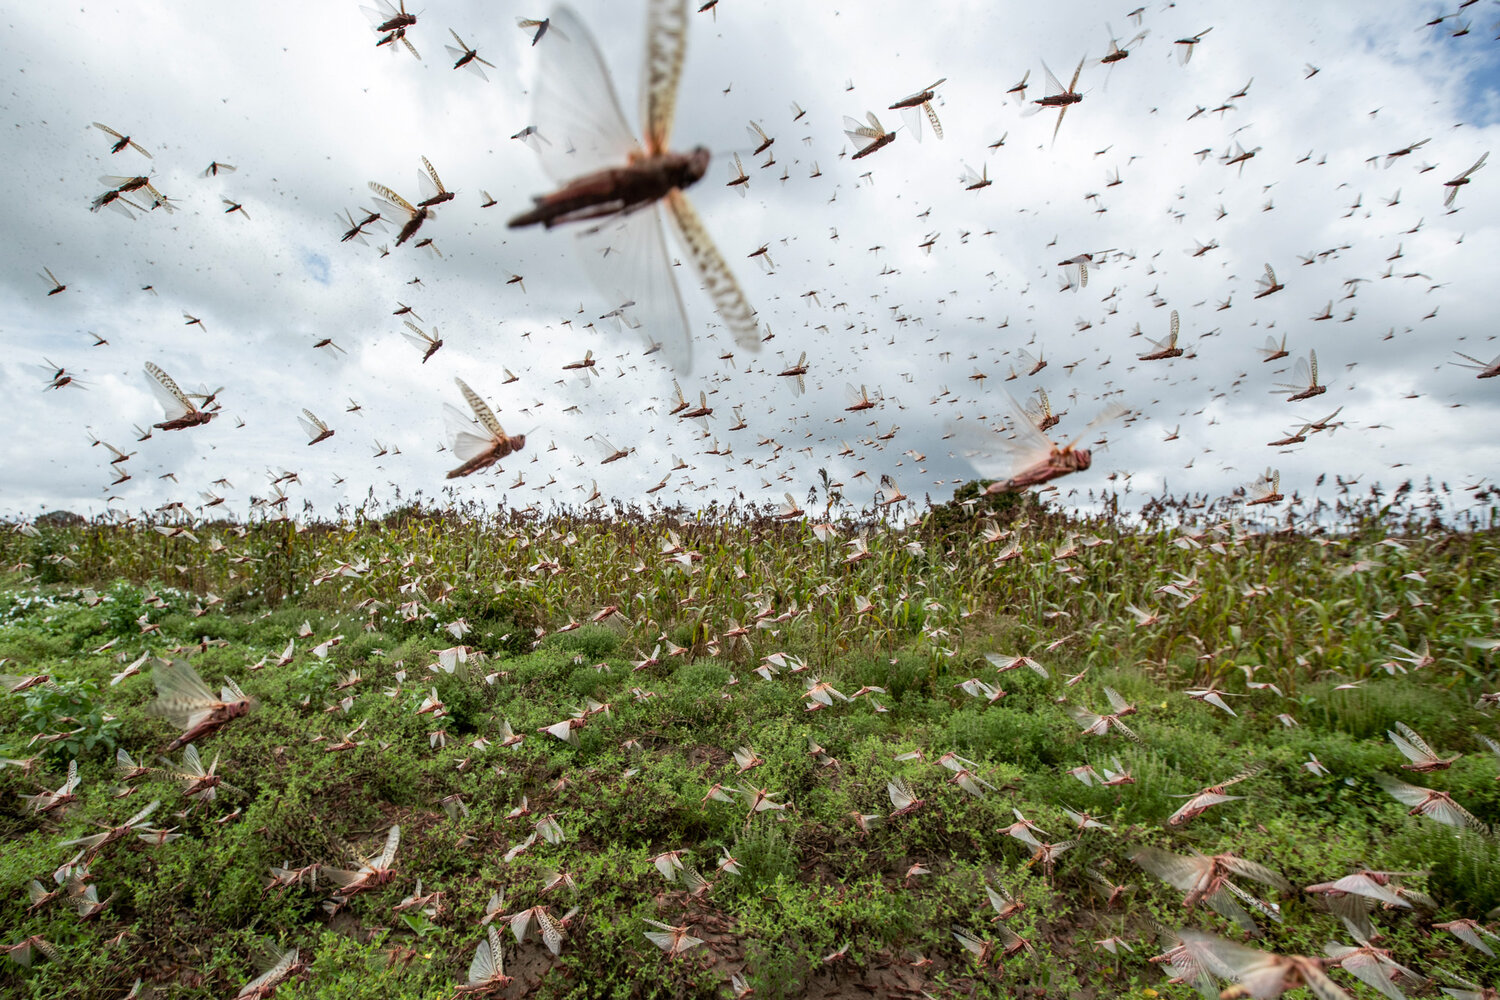  Swarms of desert locusts fly into the air from crops in Katitika village in Kenya’s Kitui county on Jan. 24, 2020. In the worst outbreak in a quarter-century, hundreds of millions of the insects swarmed into Kenya from Somalia and Ethiopia, destroying farmland and threatening an already vulnerable region. (AP Photo/Ben Curtis) 